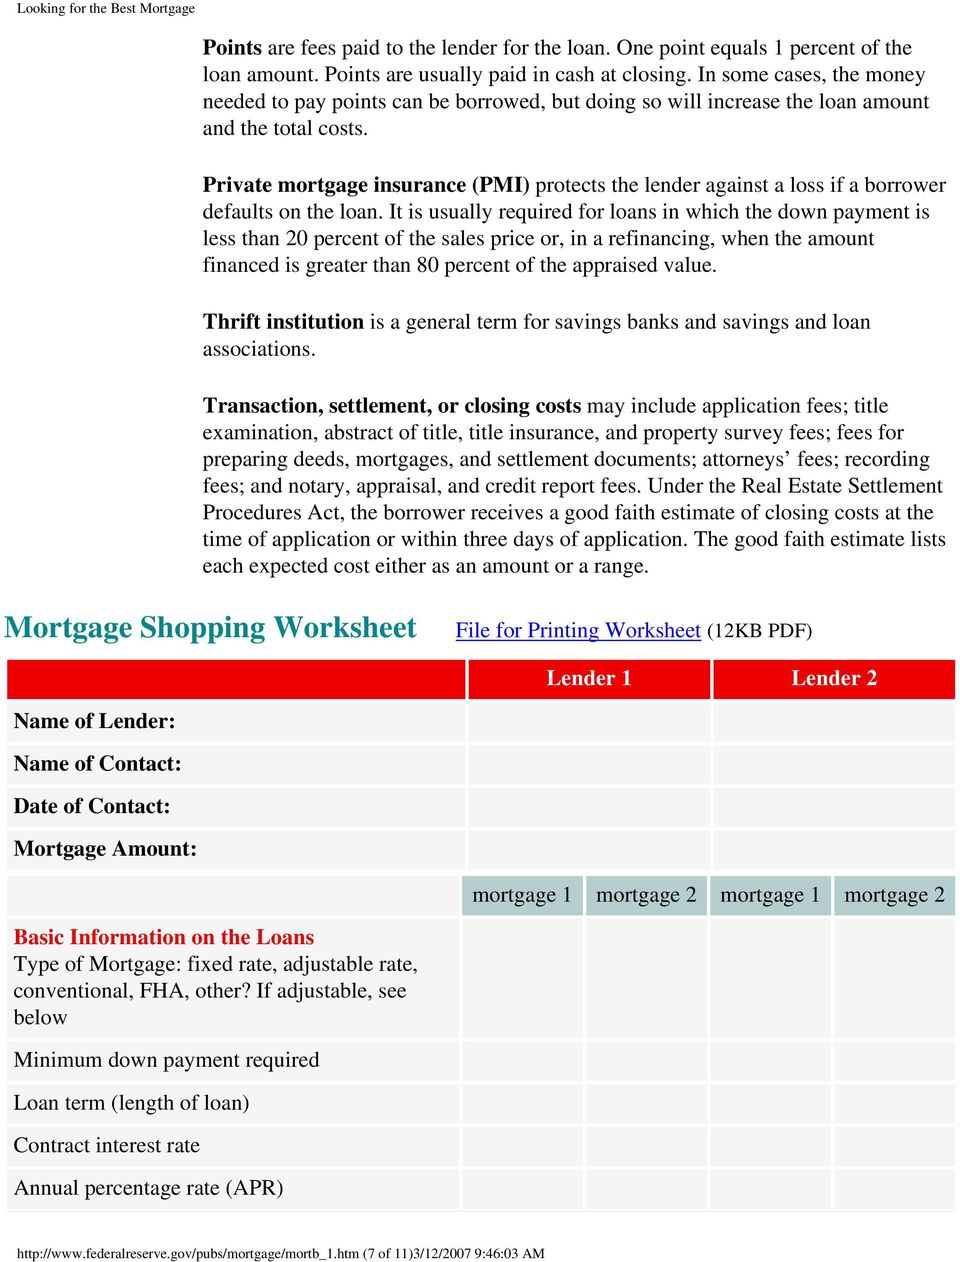 Private mortgage insurance (PMI) protects the lender against a loss if a borrower defaults on the loan.